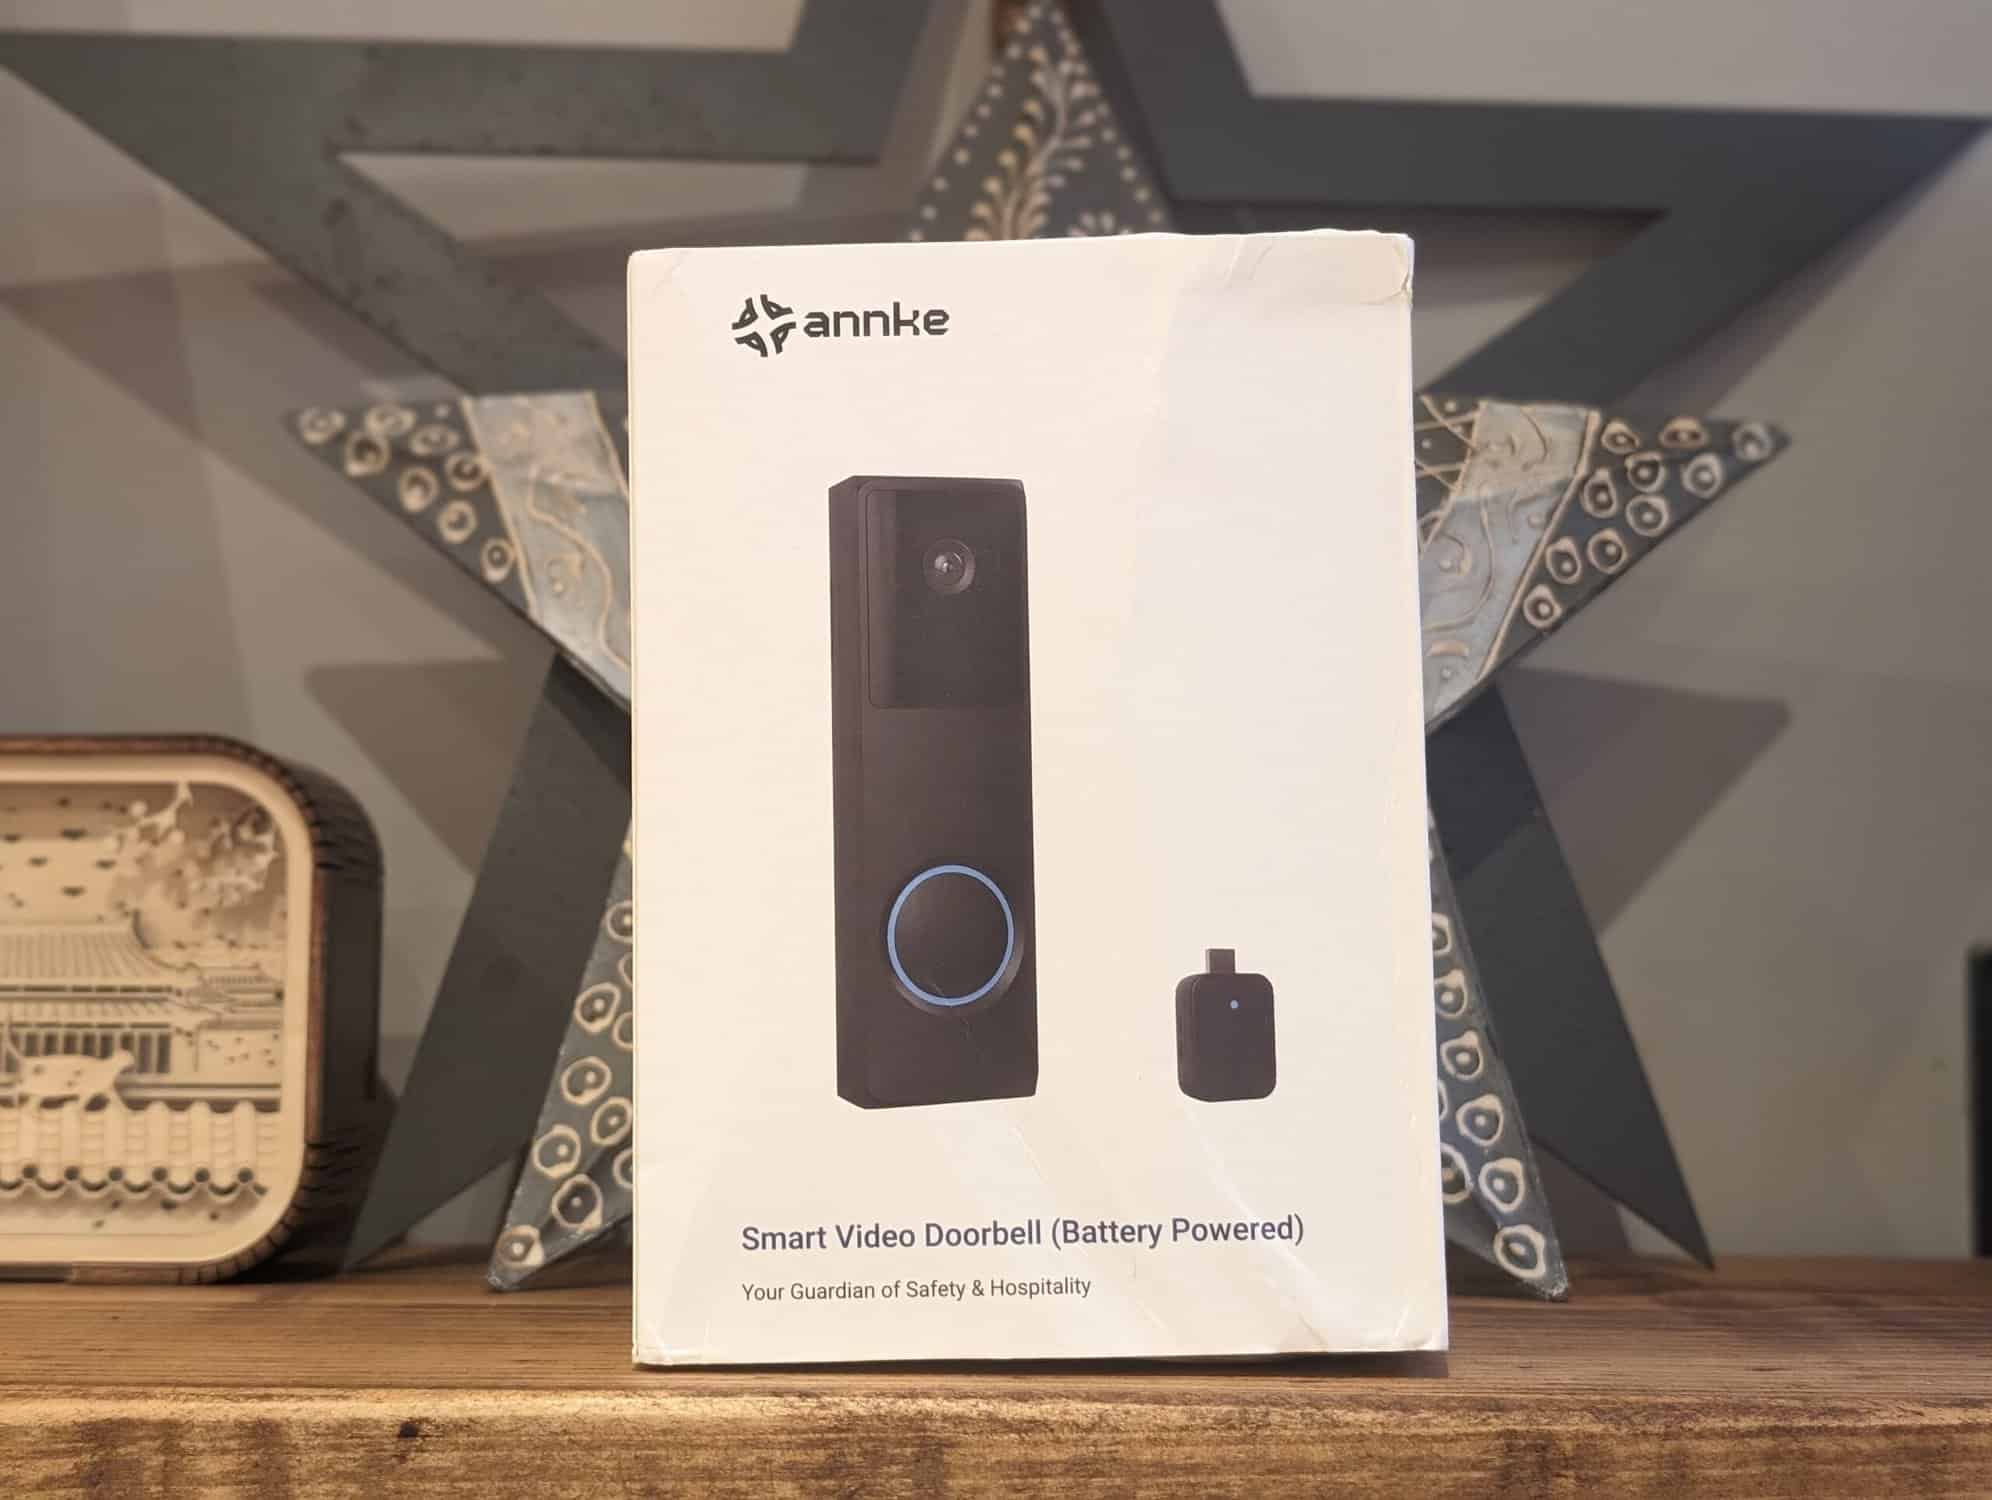 Annke Whiffle 1080P Video Doorbell Camera Review scaled